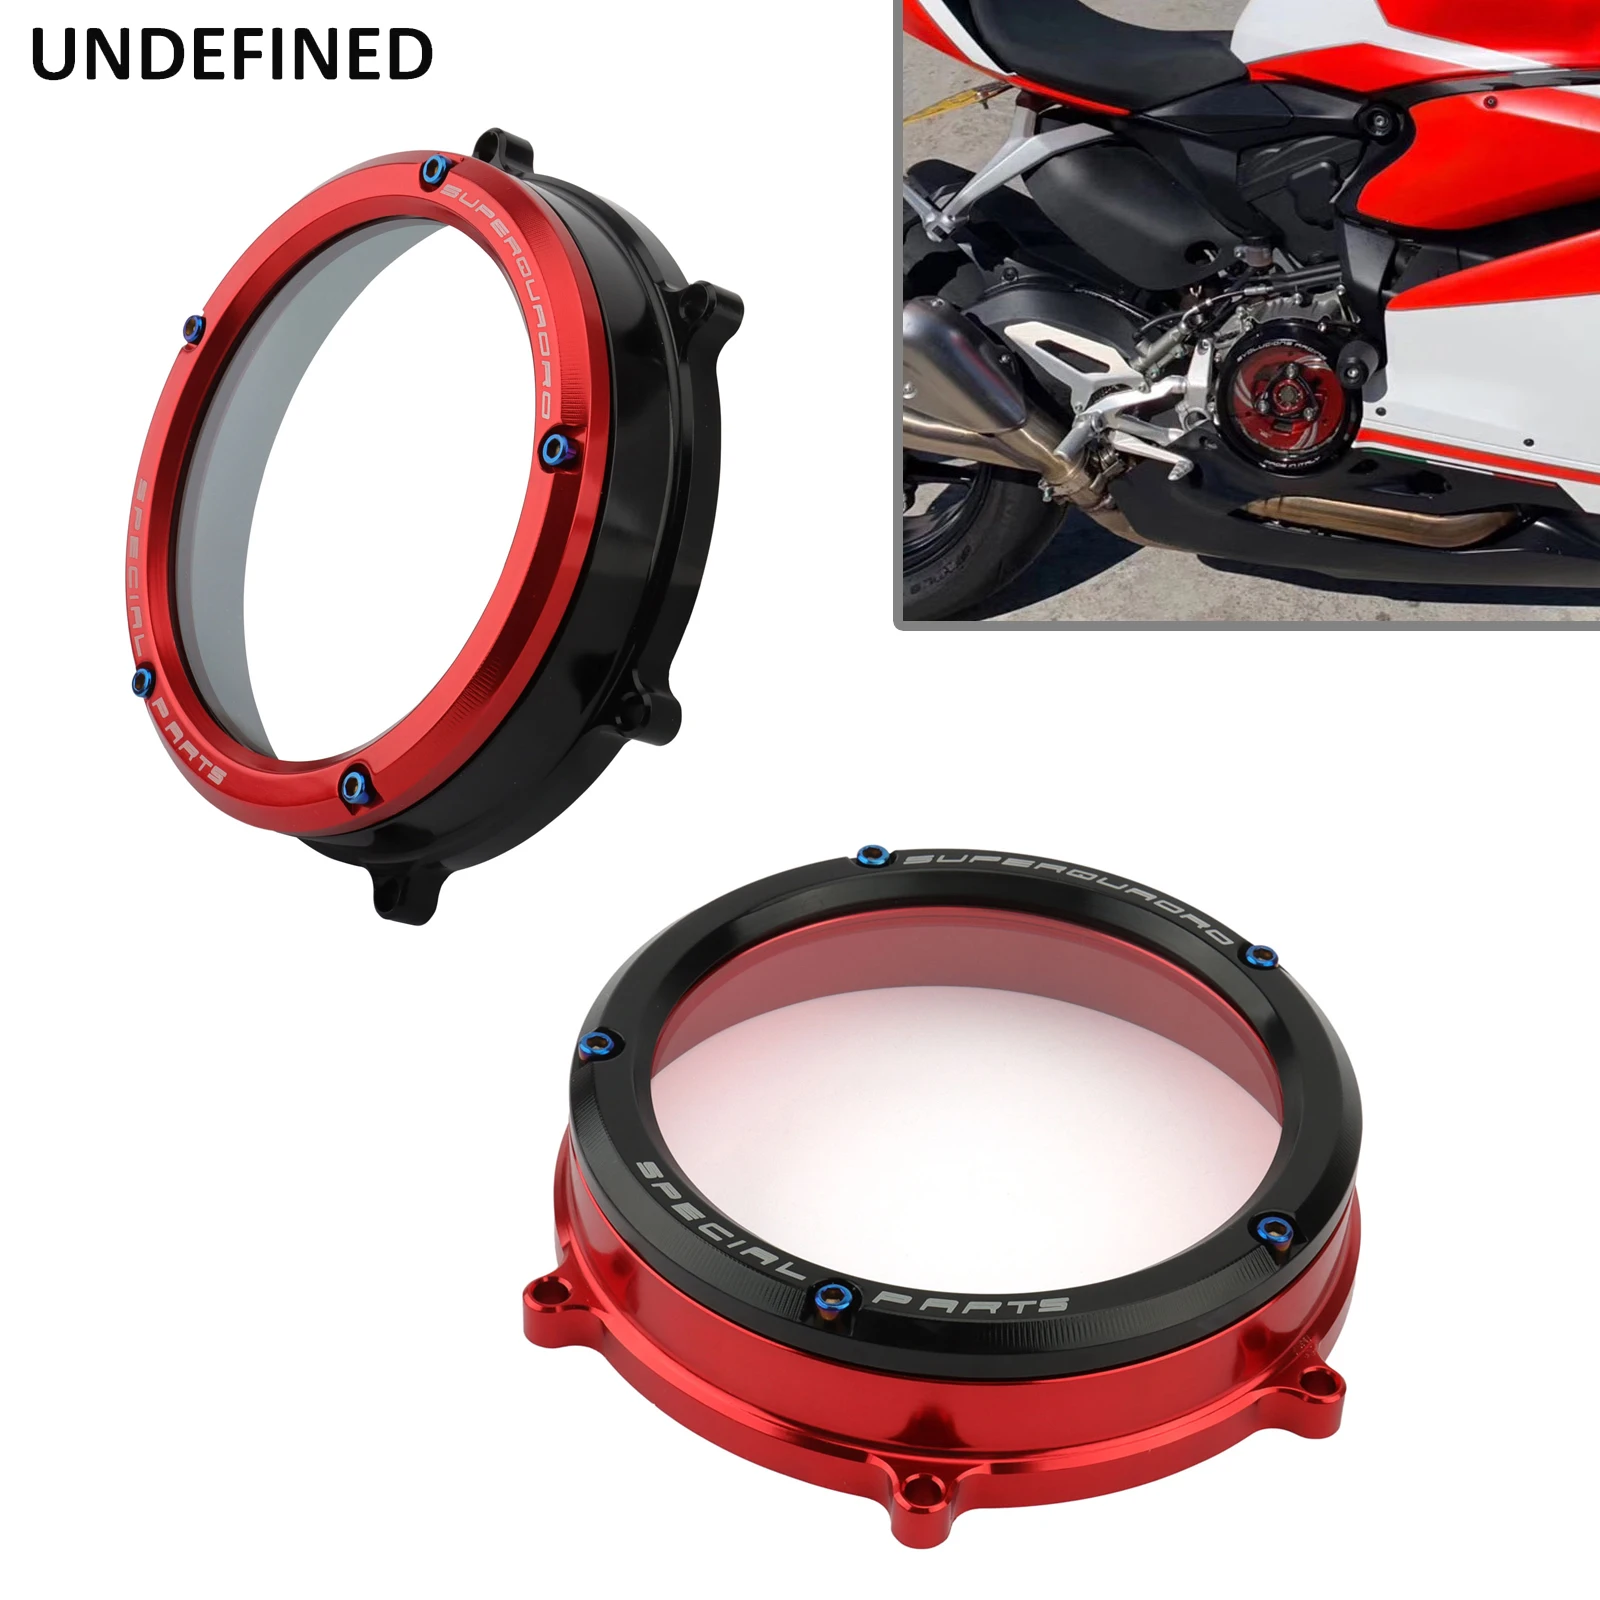 Enlarge For Ducati 959 1199 1299 Motorcycle Racing Engine Clear Clutch Cover Protector Guard Black Panigale Corse R S ABS V2 Tricolore